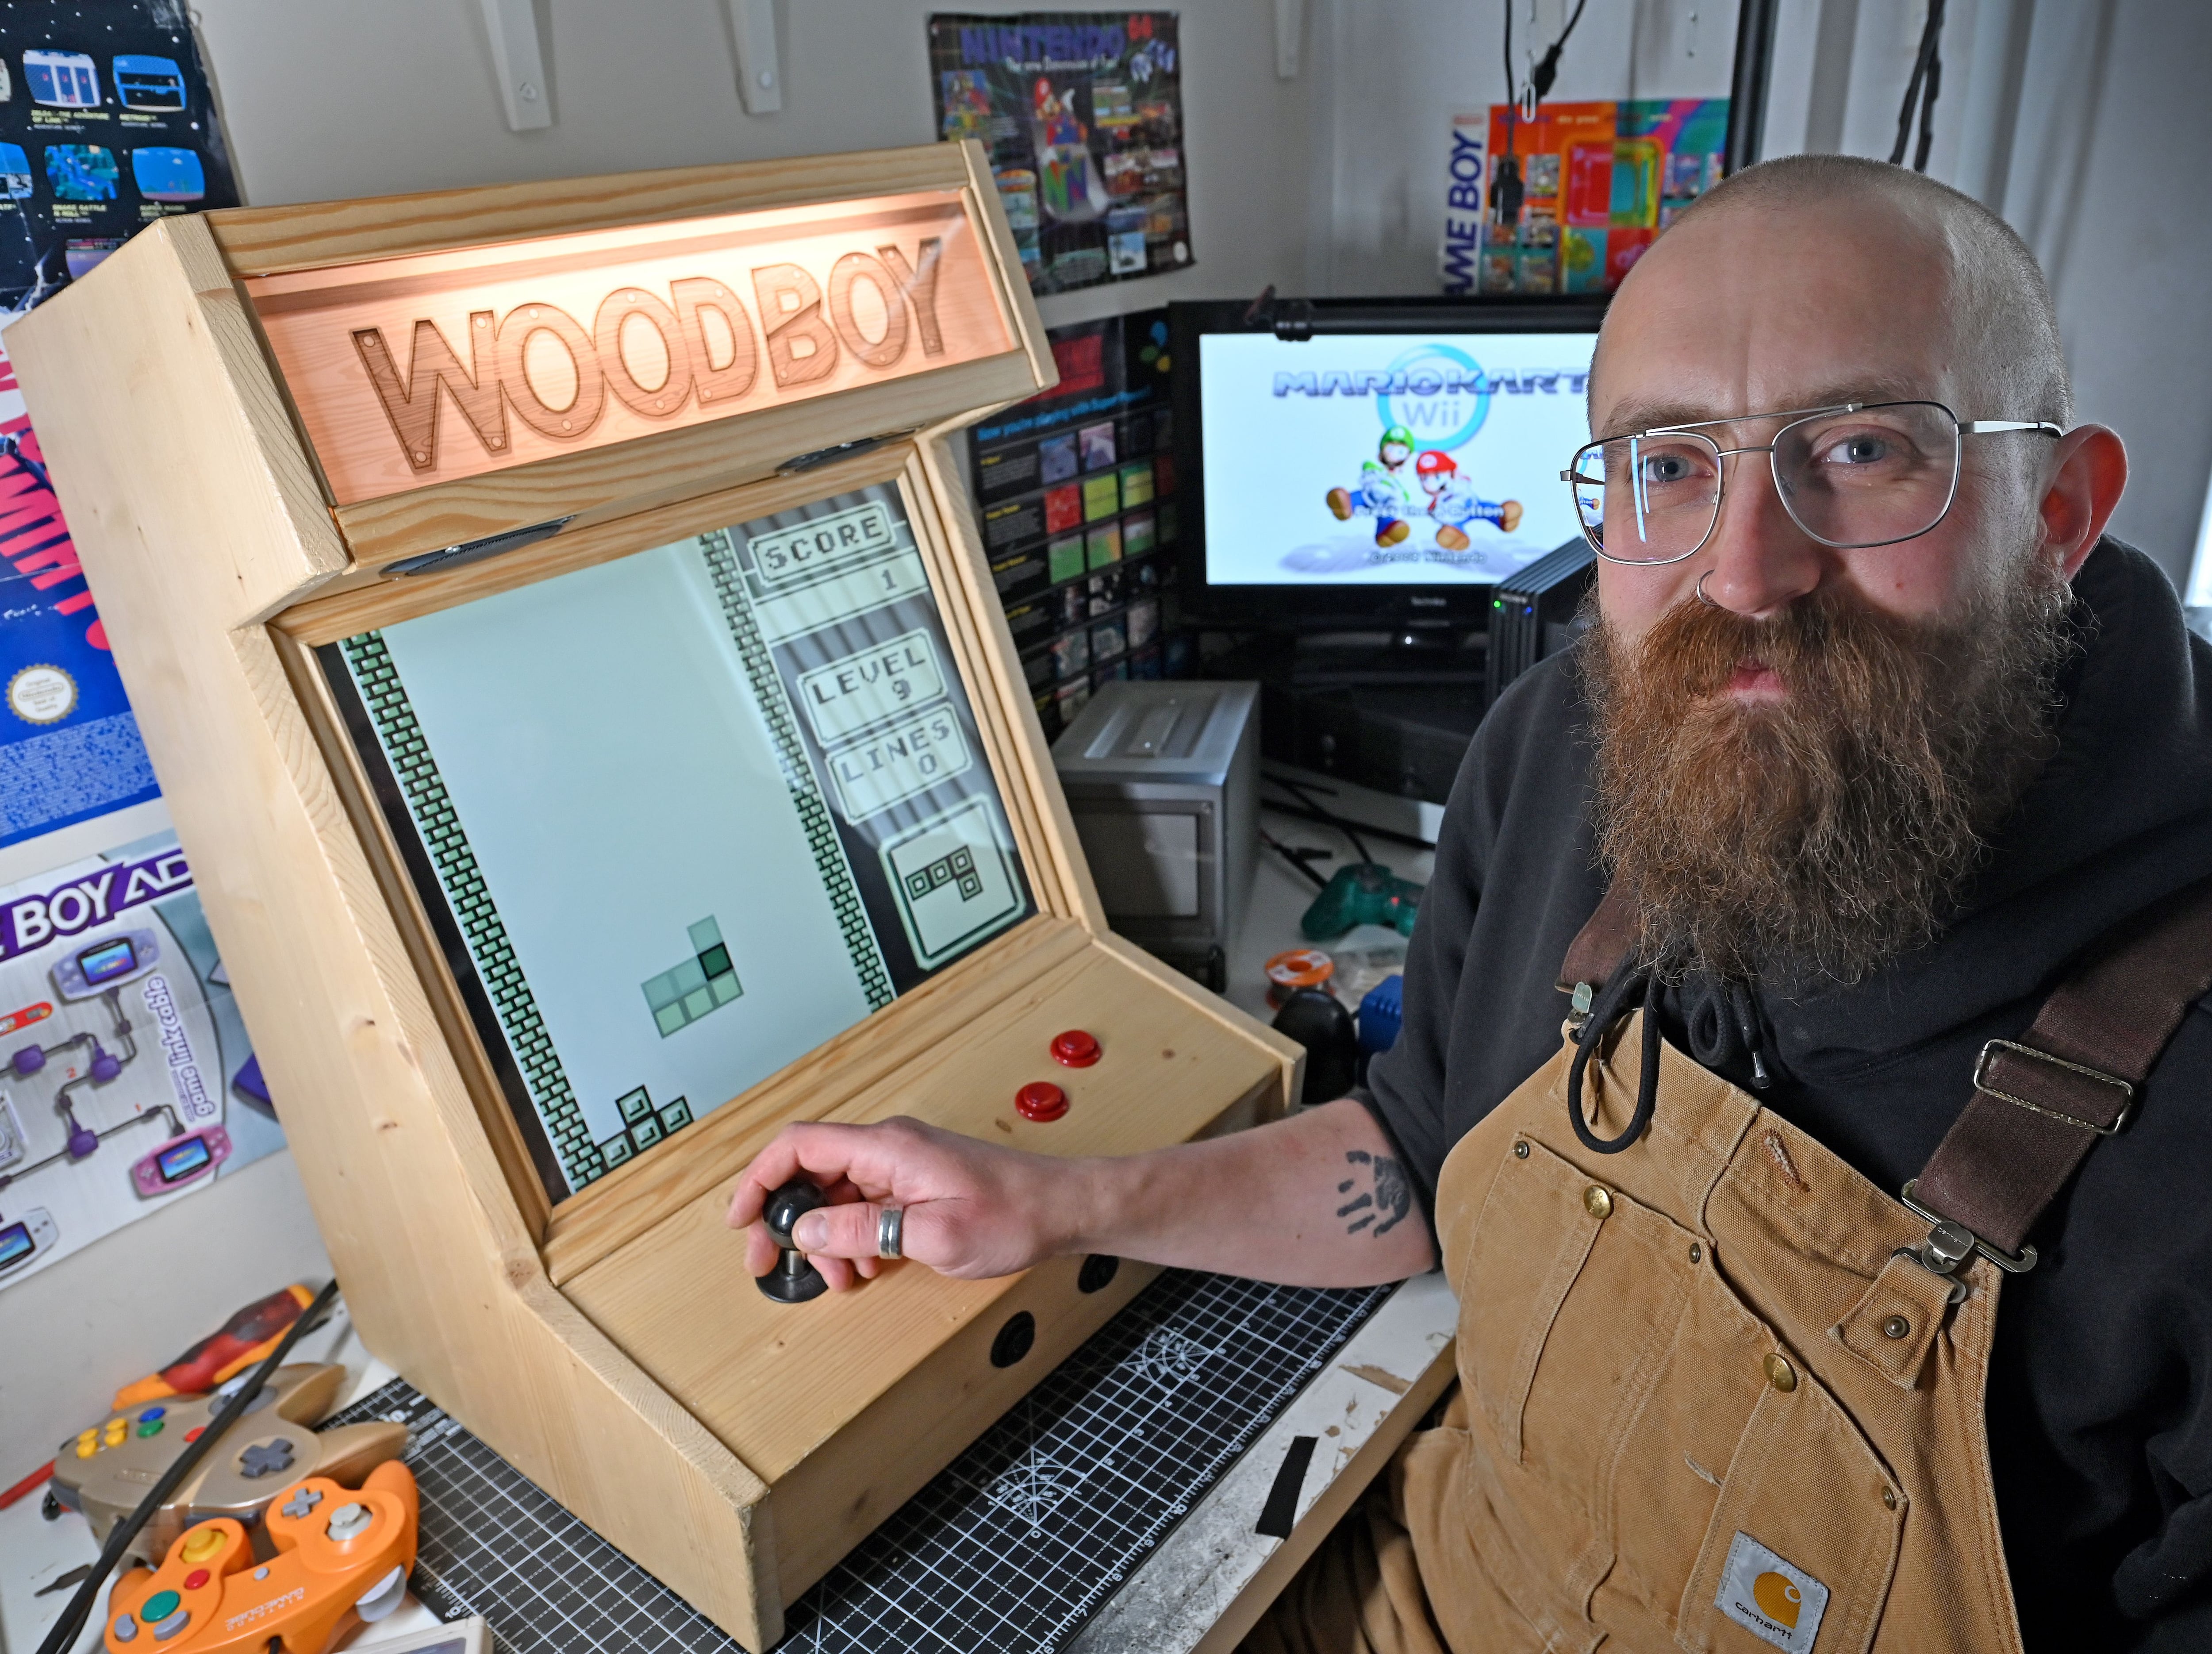 Meet the retro gamer making unique consoles at his home in Wolverhampton 